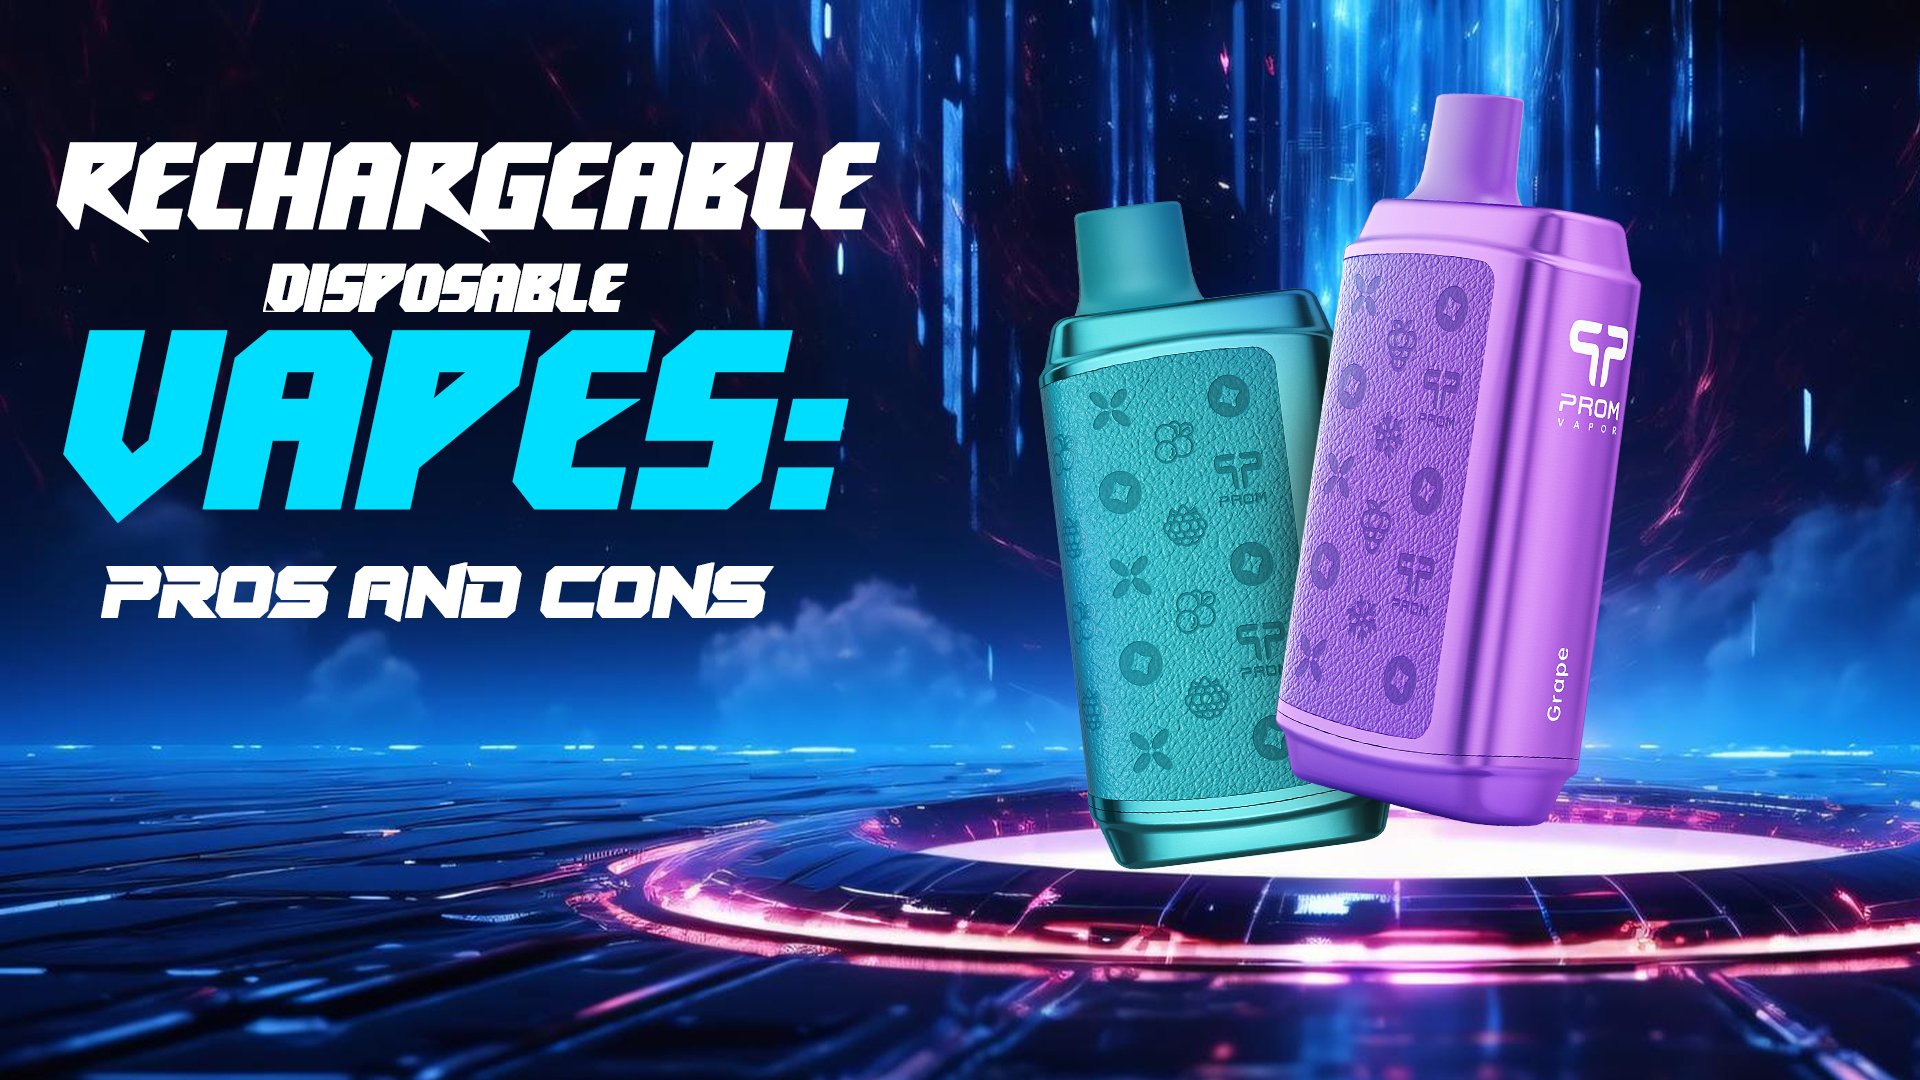 Rechargeable Disposable Vapes - Pros and Cons